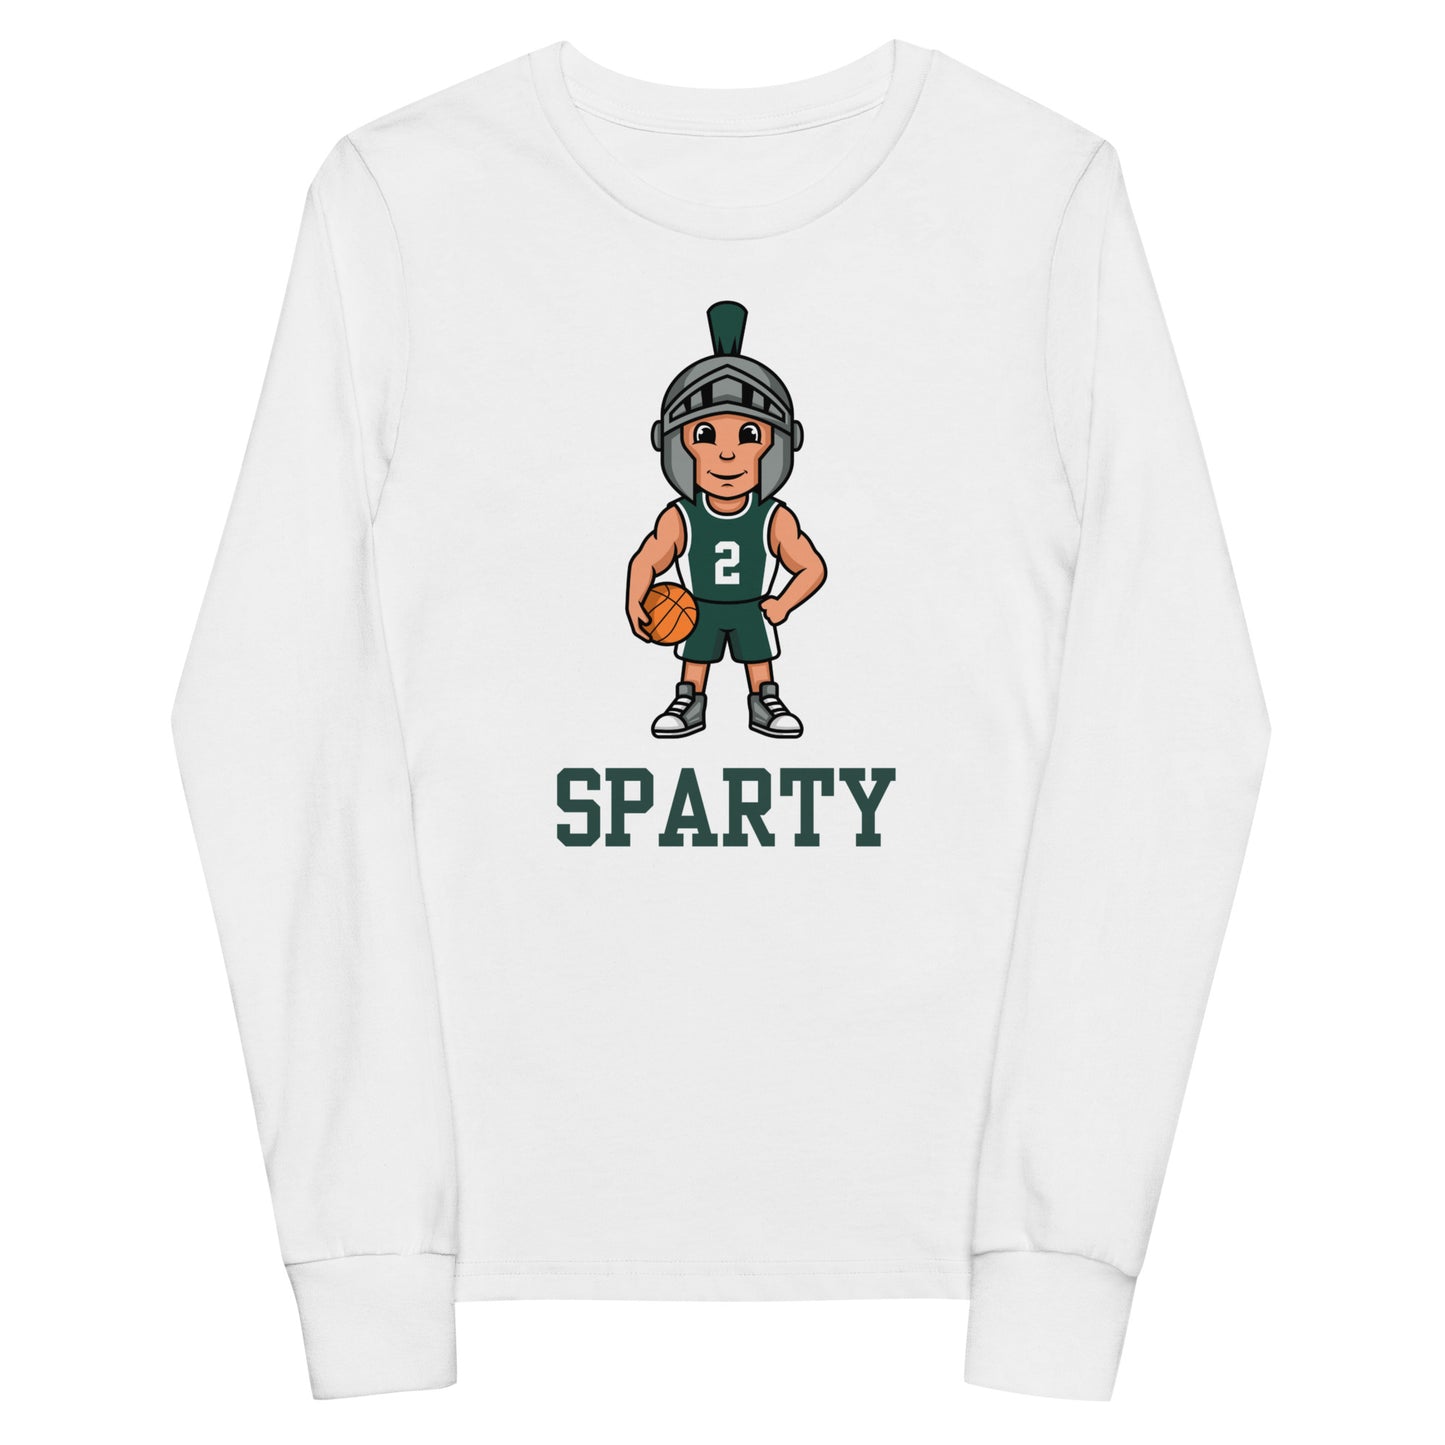 Sparty Youth long sleeve tee